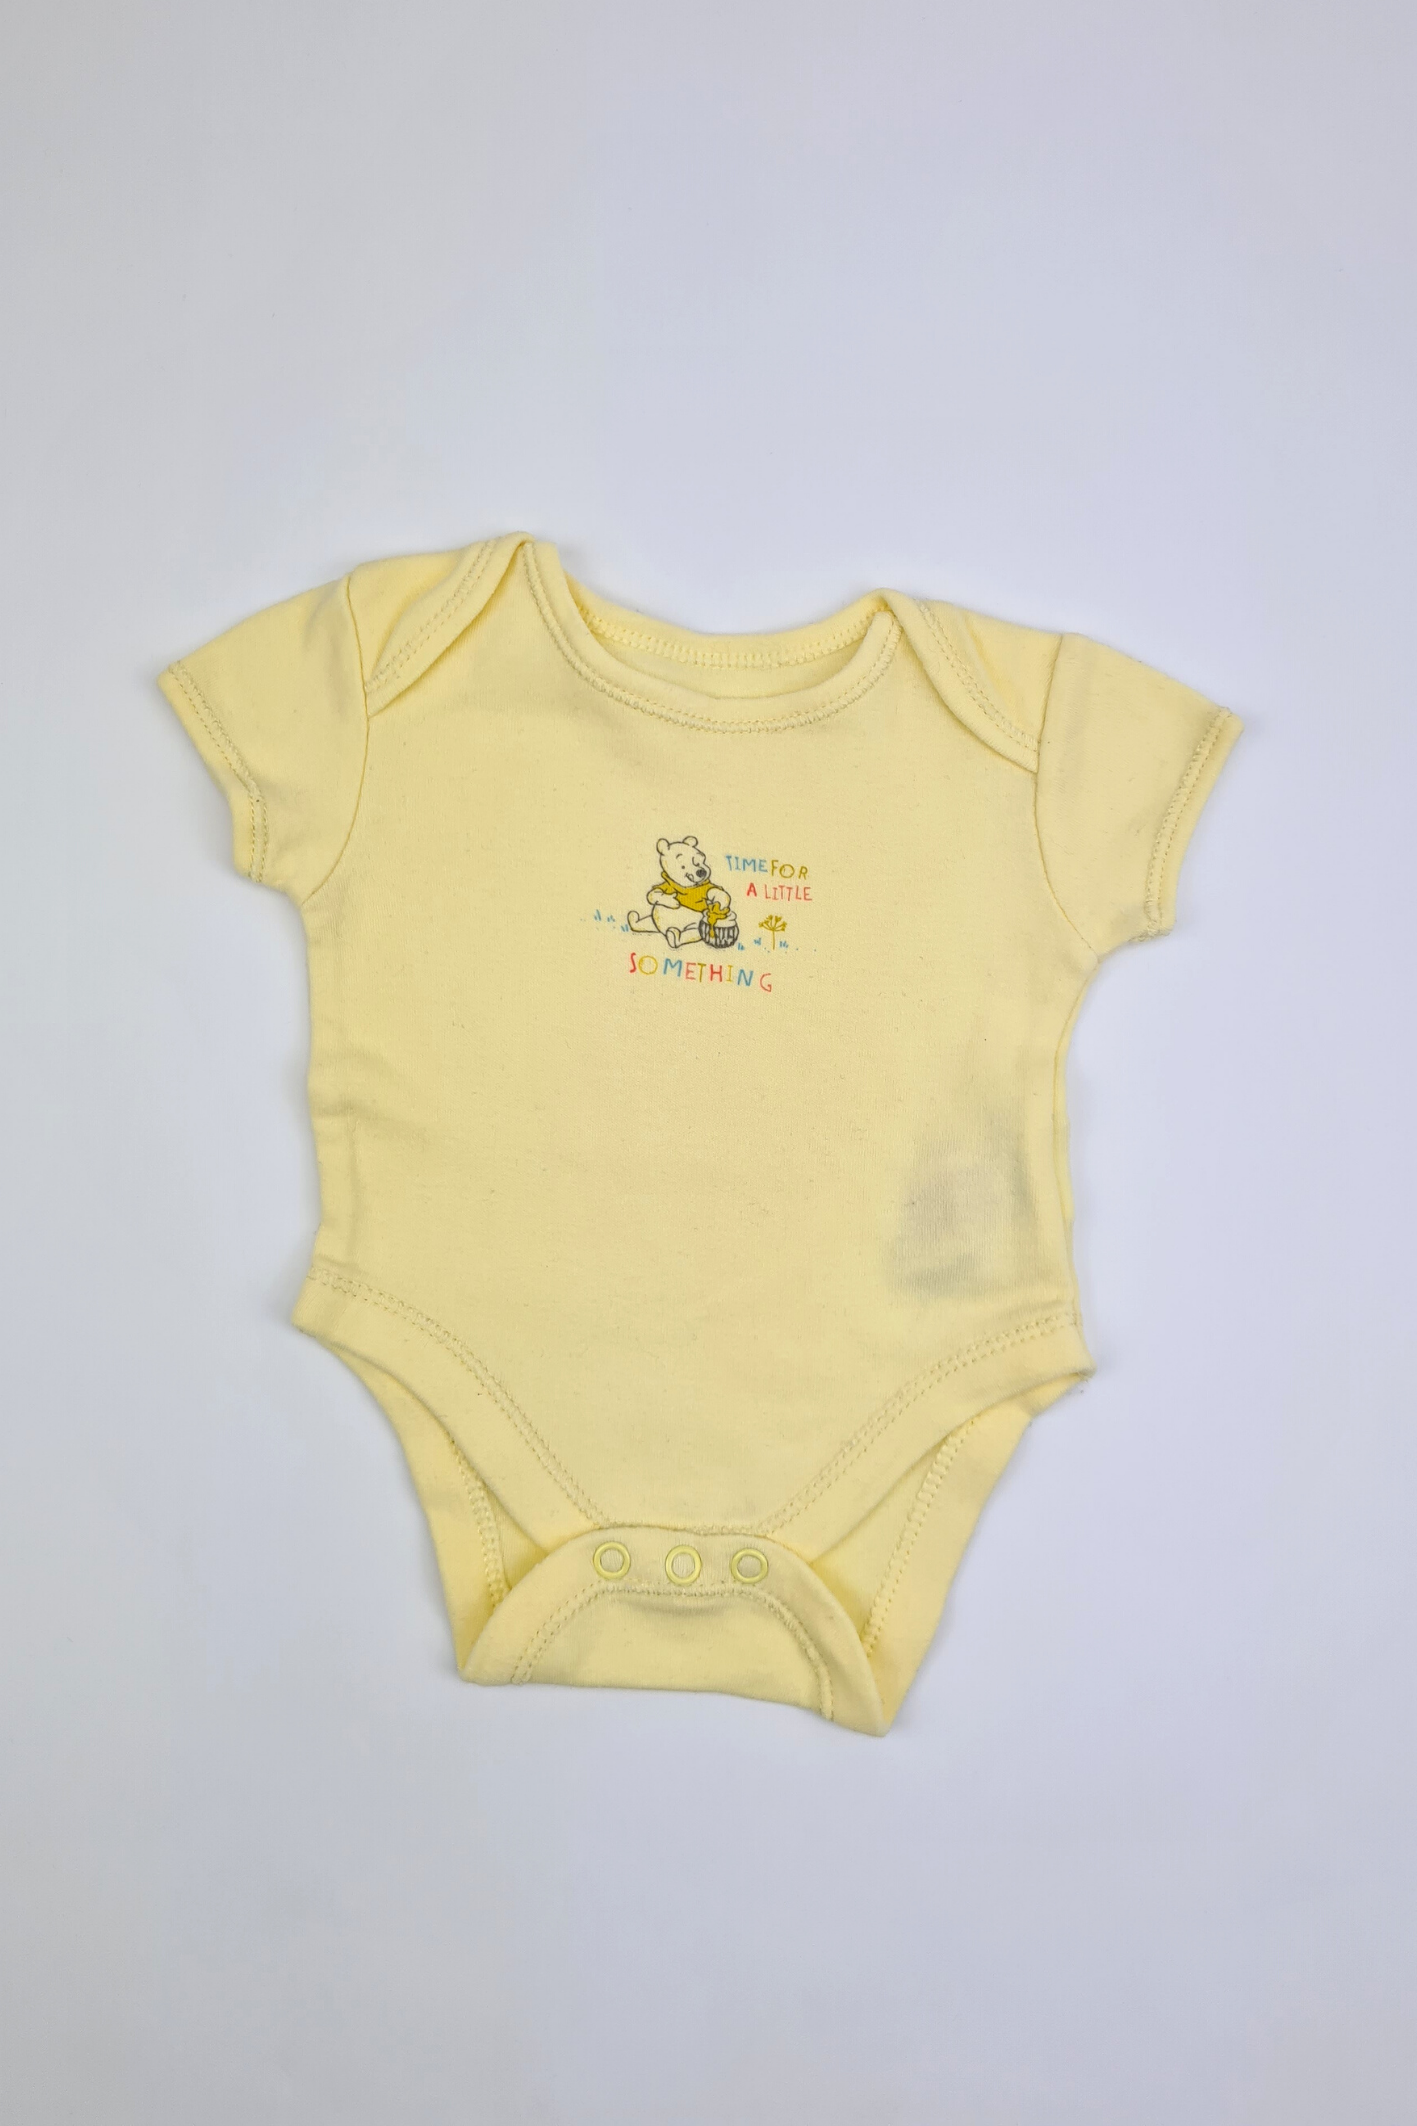 Newborn - 'Time For A Little Something' 10lbs Yellow Bodysuit (Disney)